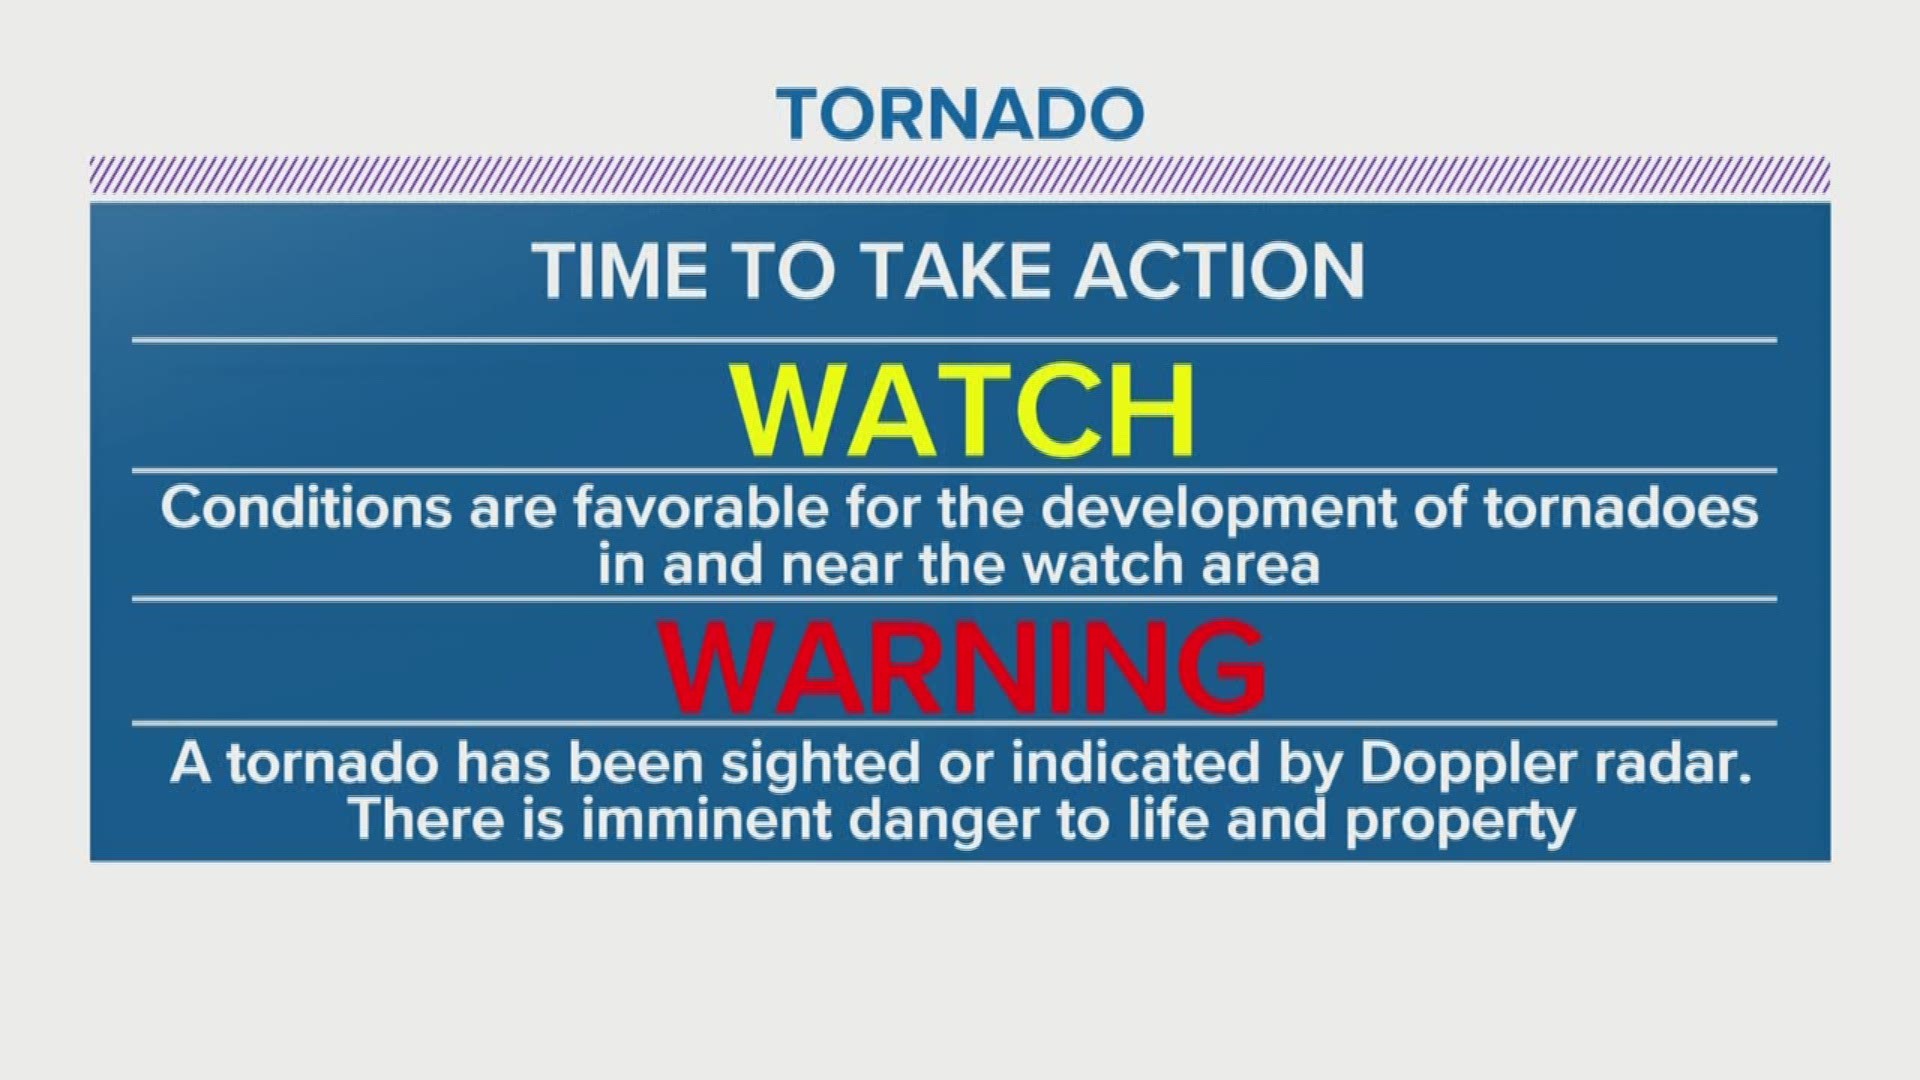 What is the difference between tornado warning and tornado watch